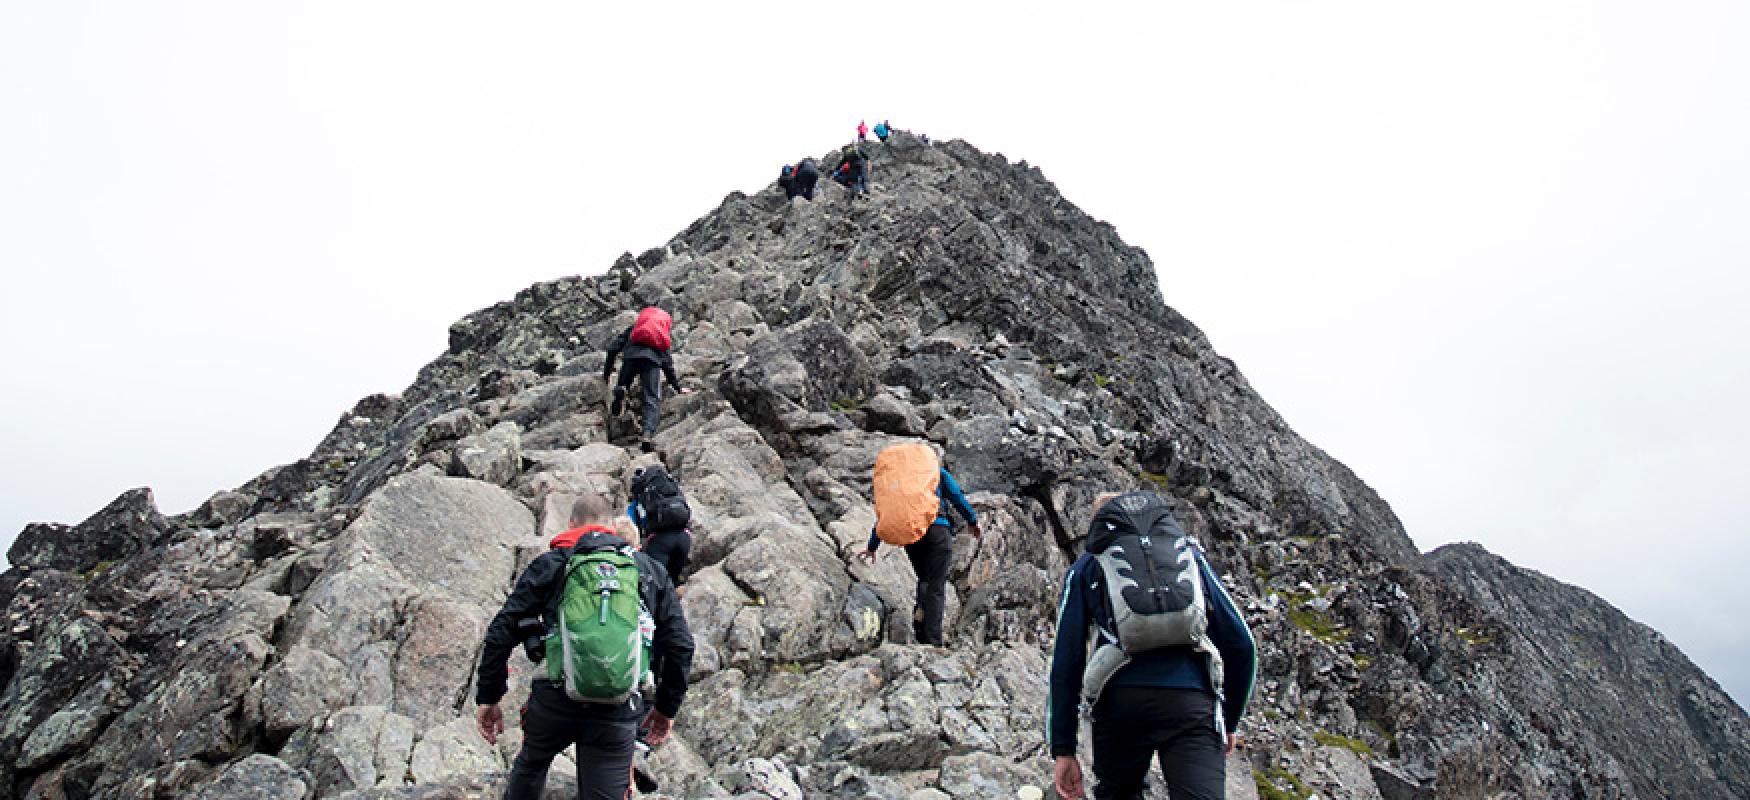 People hiking up a rocky mountain top.